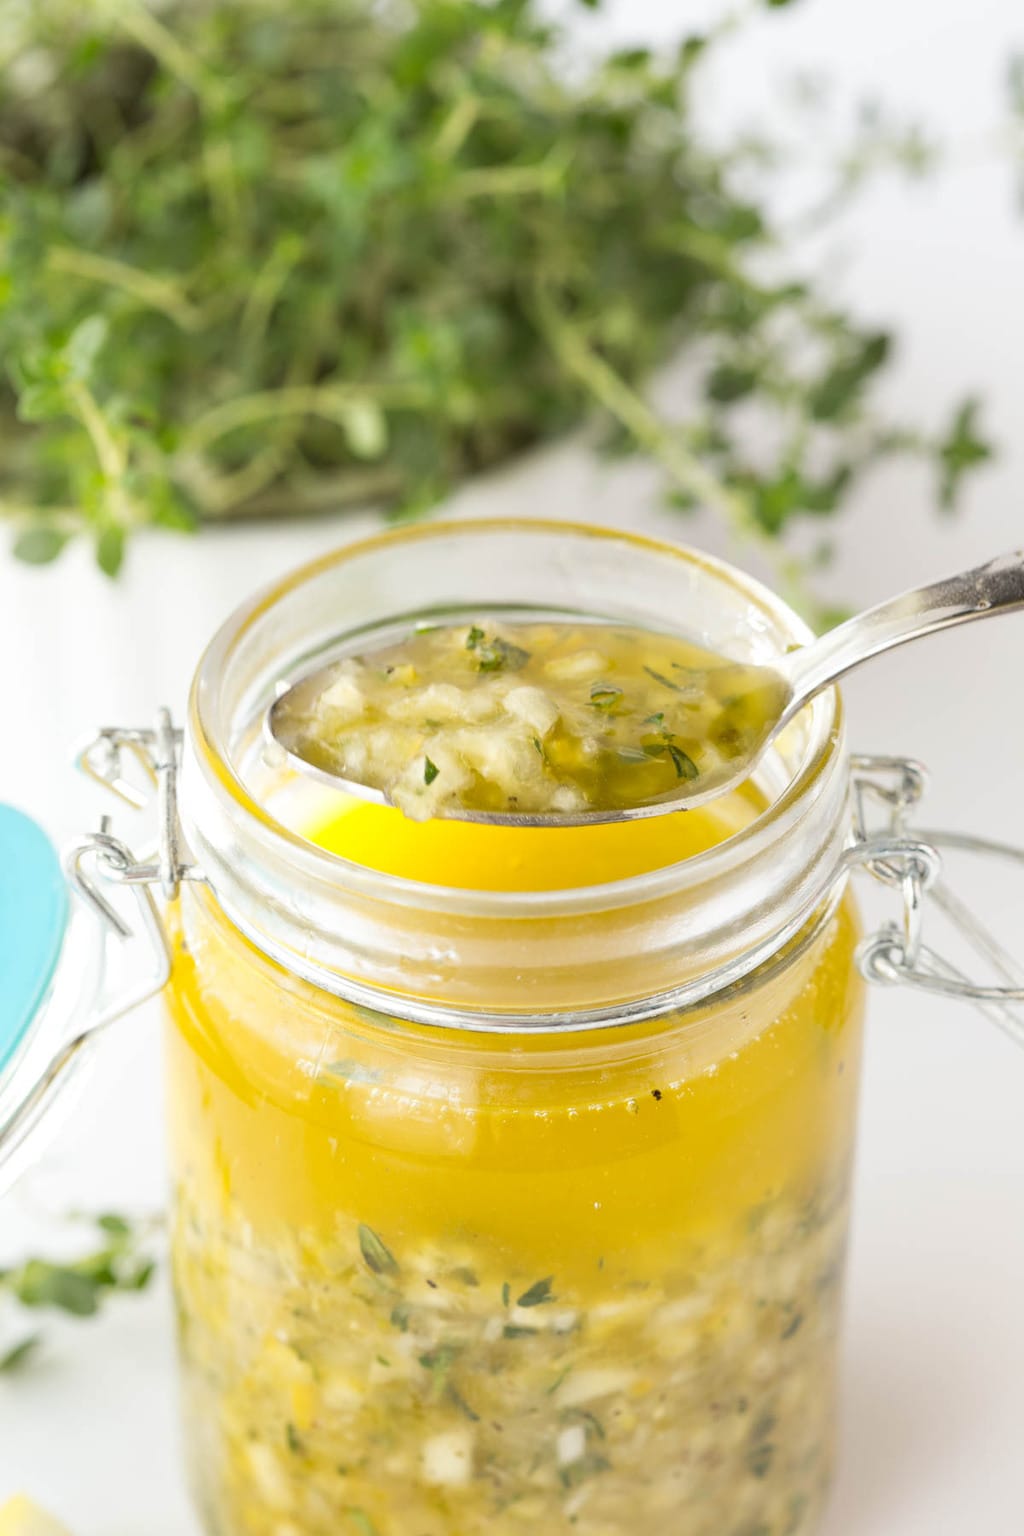 Photo of a jar of Whole Lemon Thyme Salad Dressing with a spoonful of the dressing resting on top of the jar.